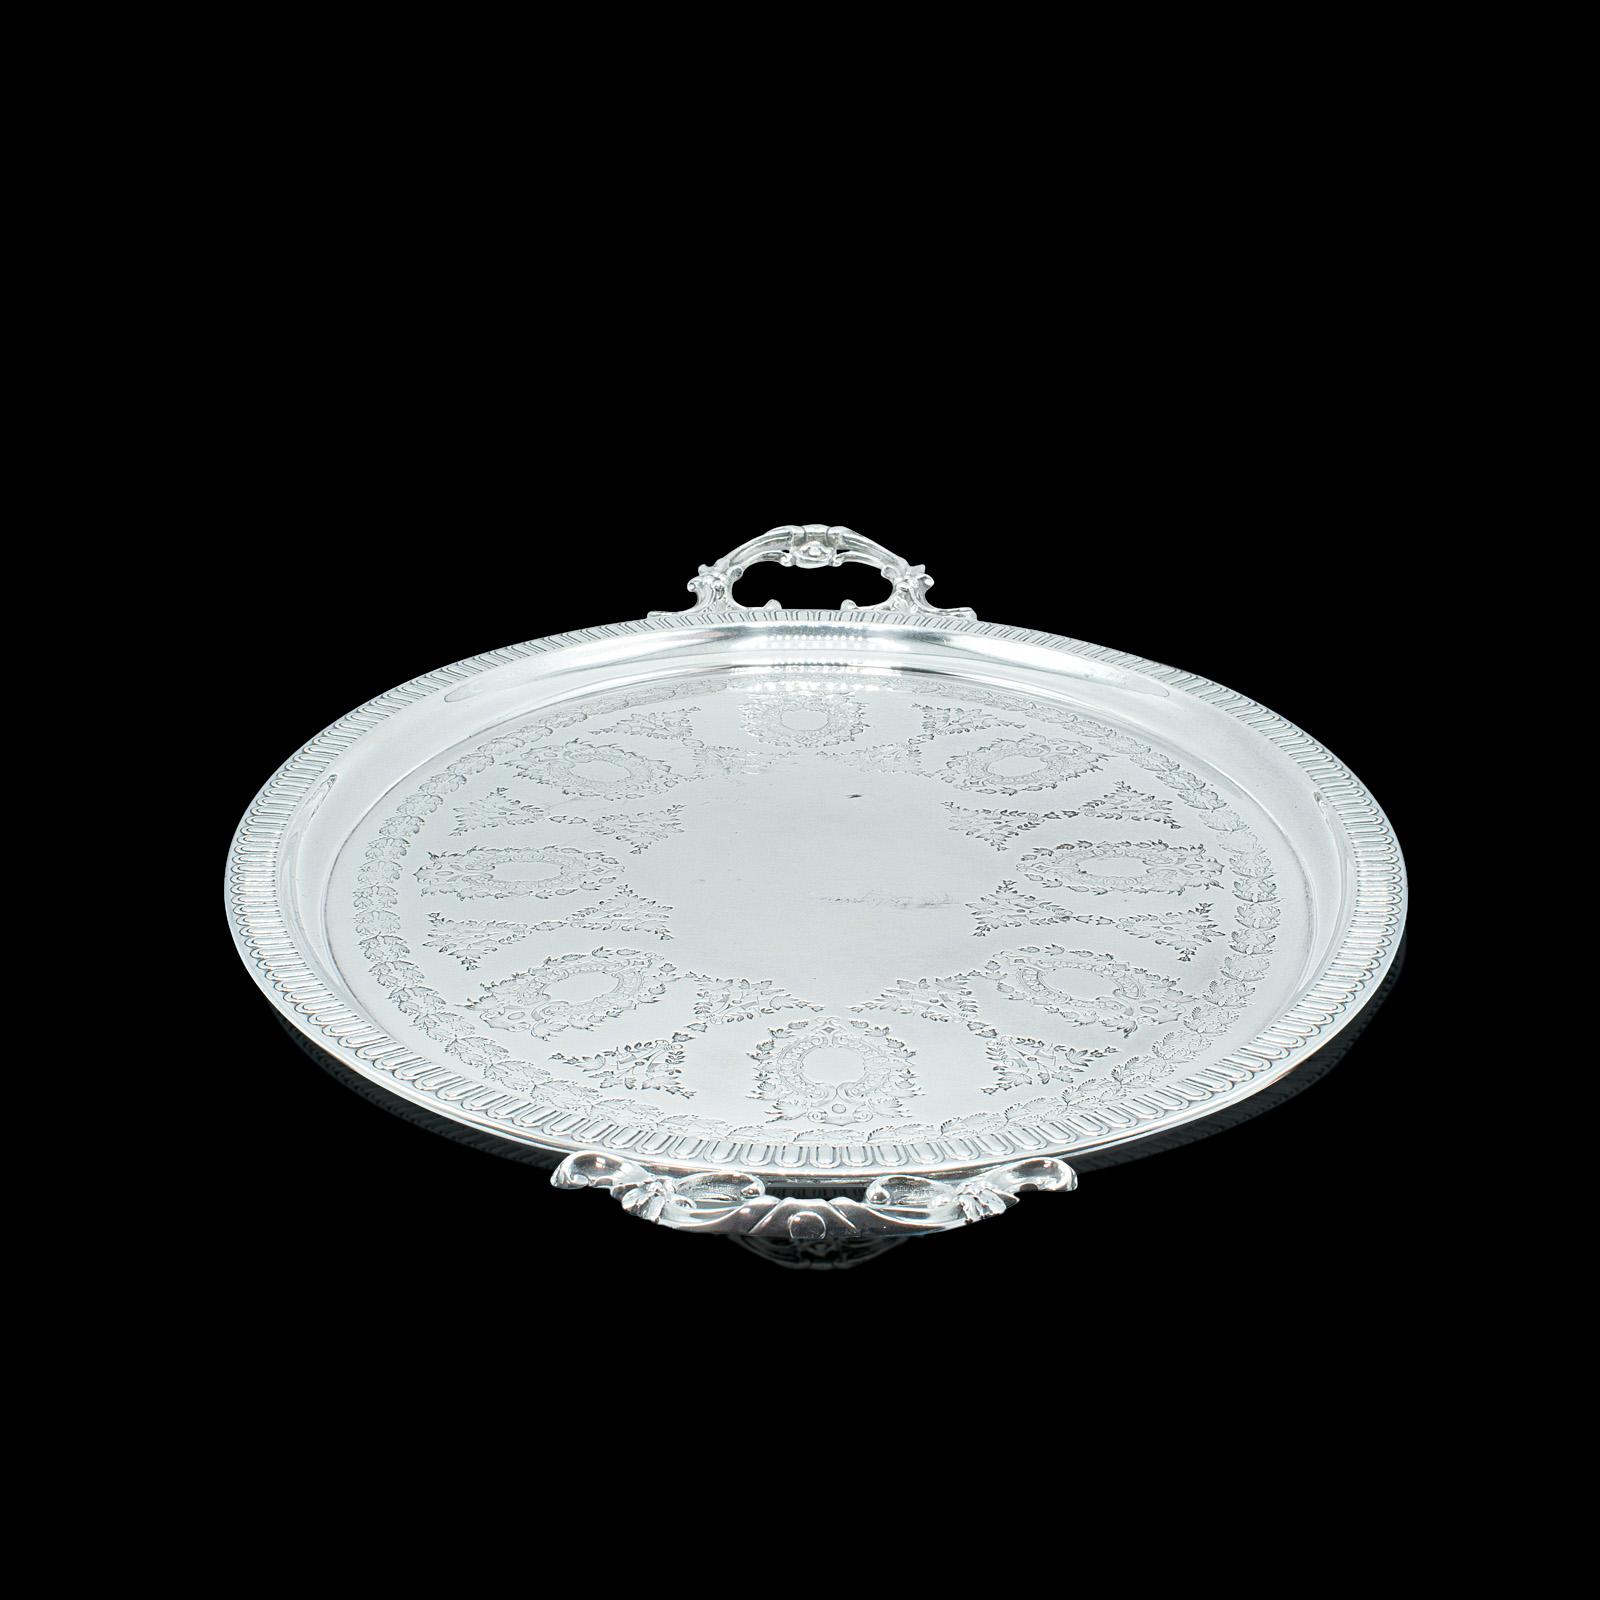 British Antique Oval Decorative Serving Tray, English, Silver Plate, Afternoon Tea, 1910 For Sale